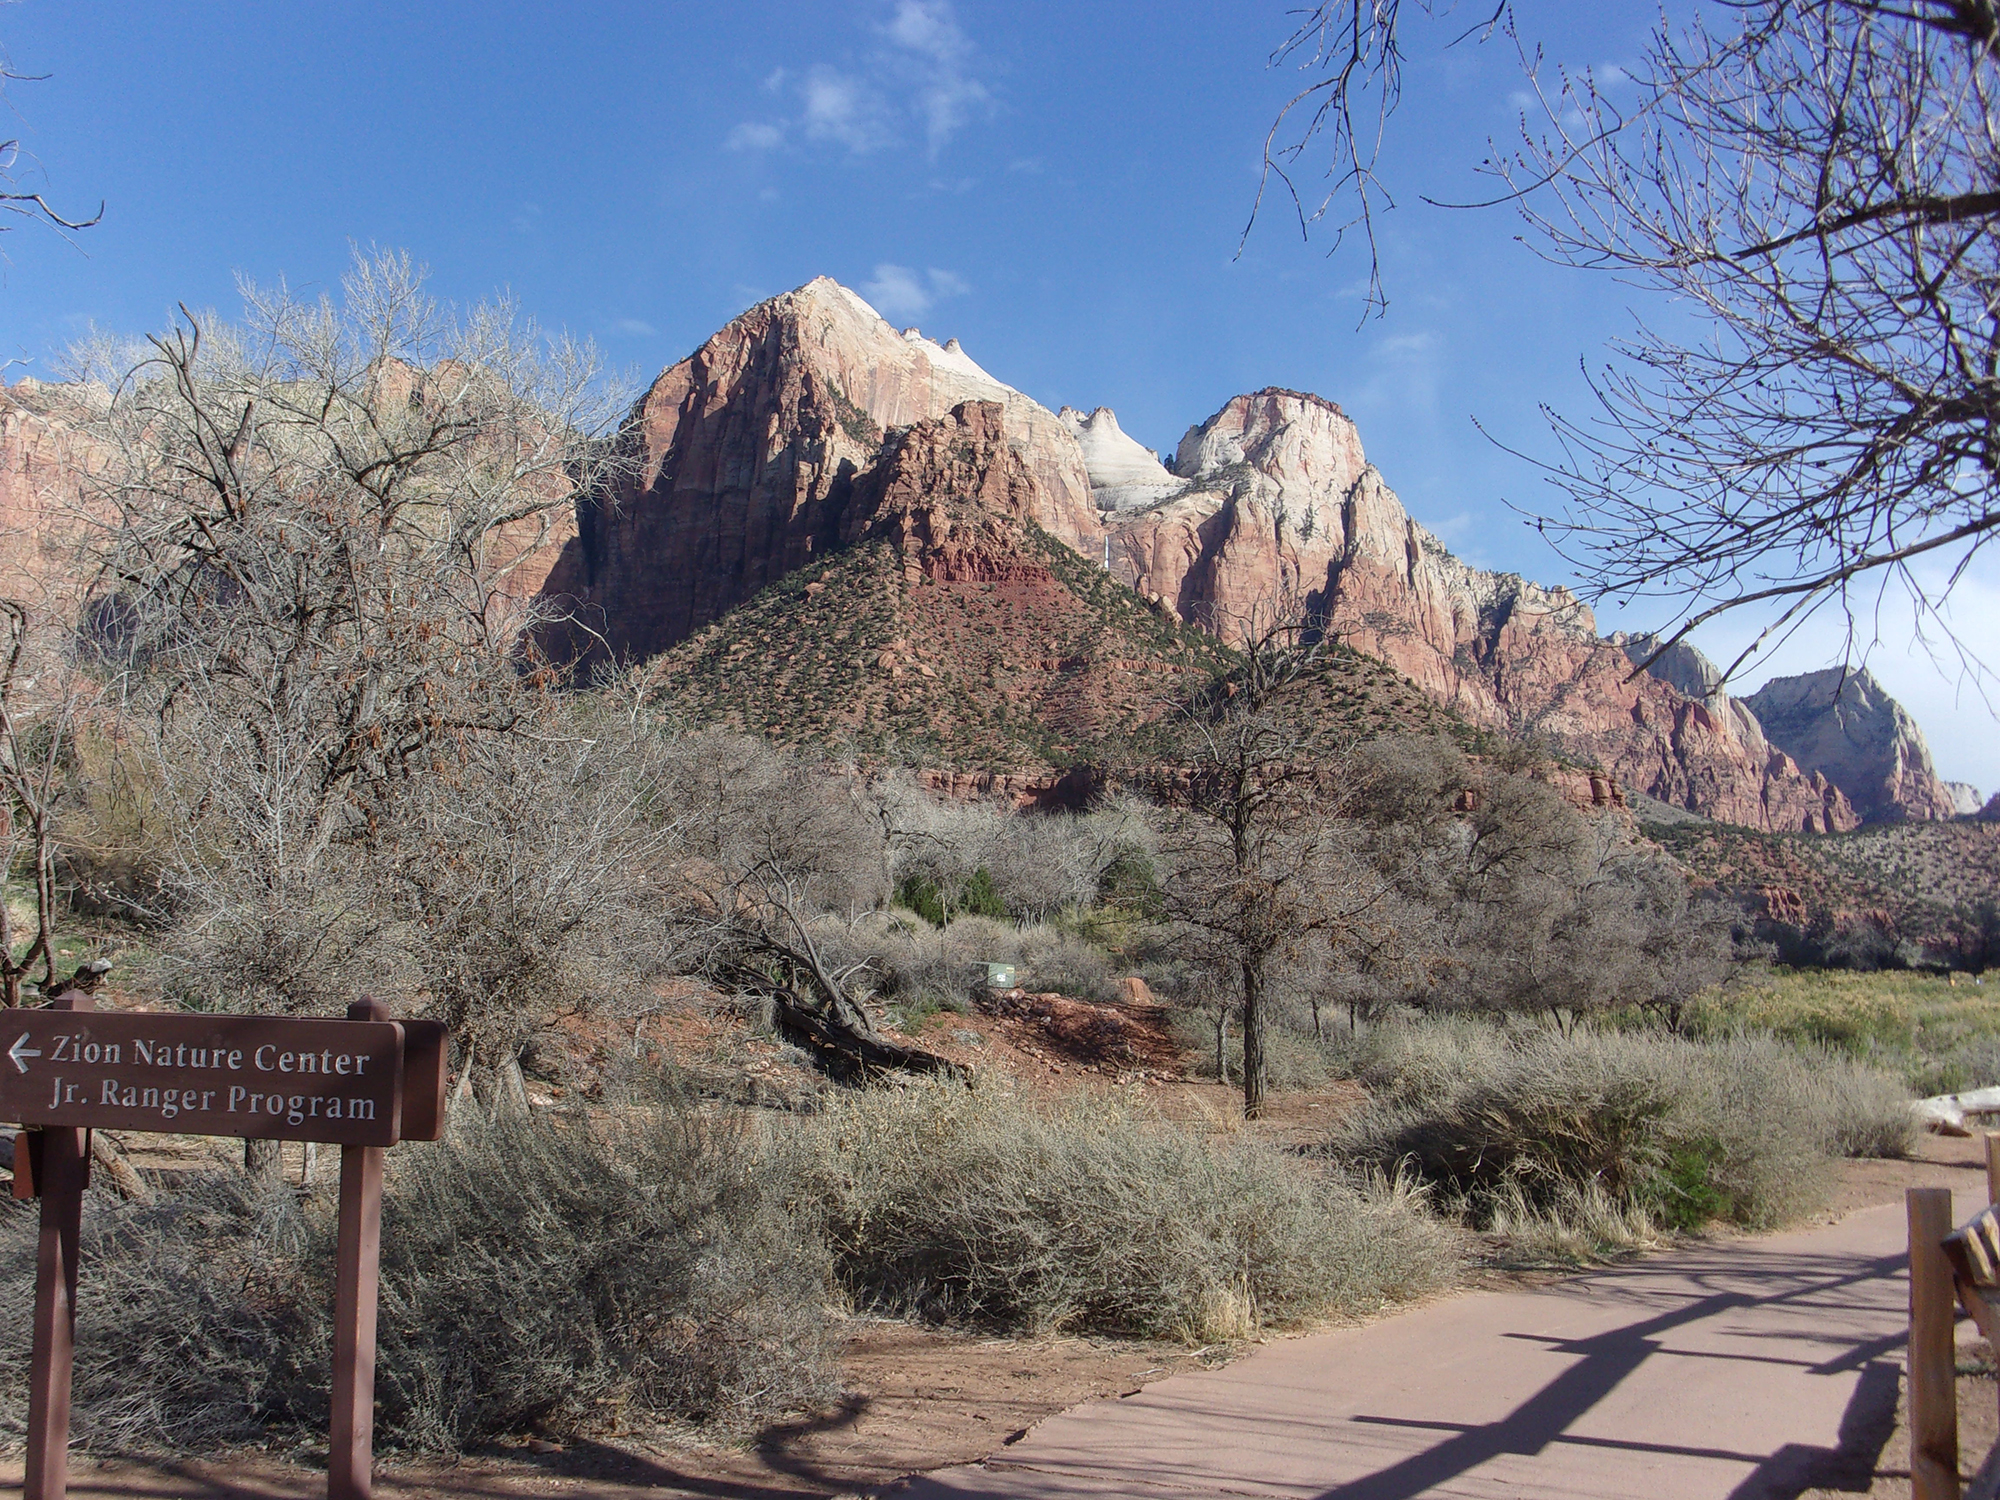 Pa’rus Trail in Zion National Park